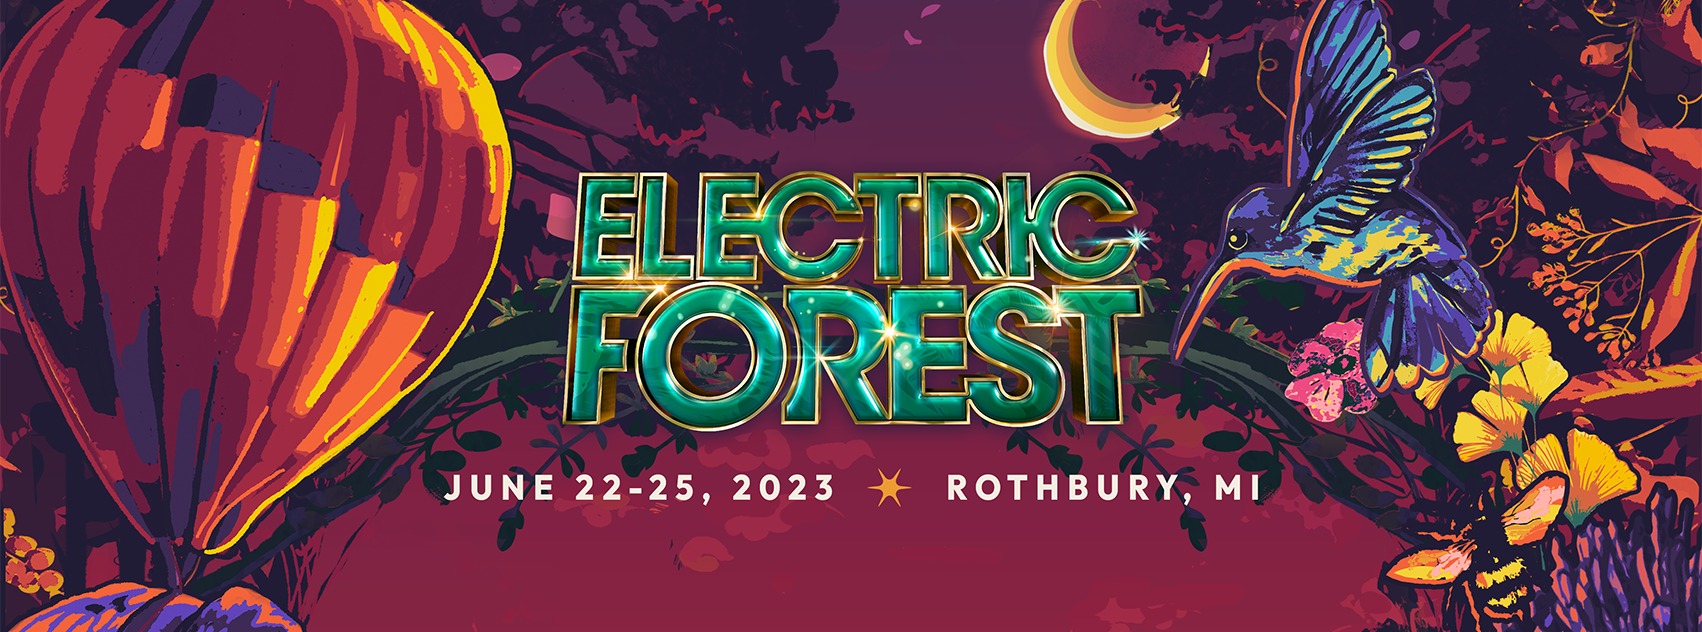 Electric Forest 2023 is Officially Sold Out - Beloved Michigan Music and Arts Festival Sold Out Hours Following Public On Sale